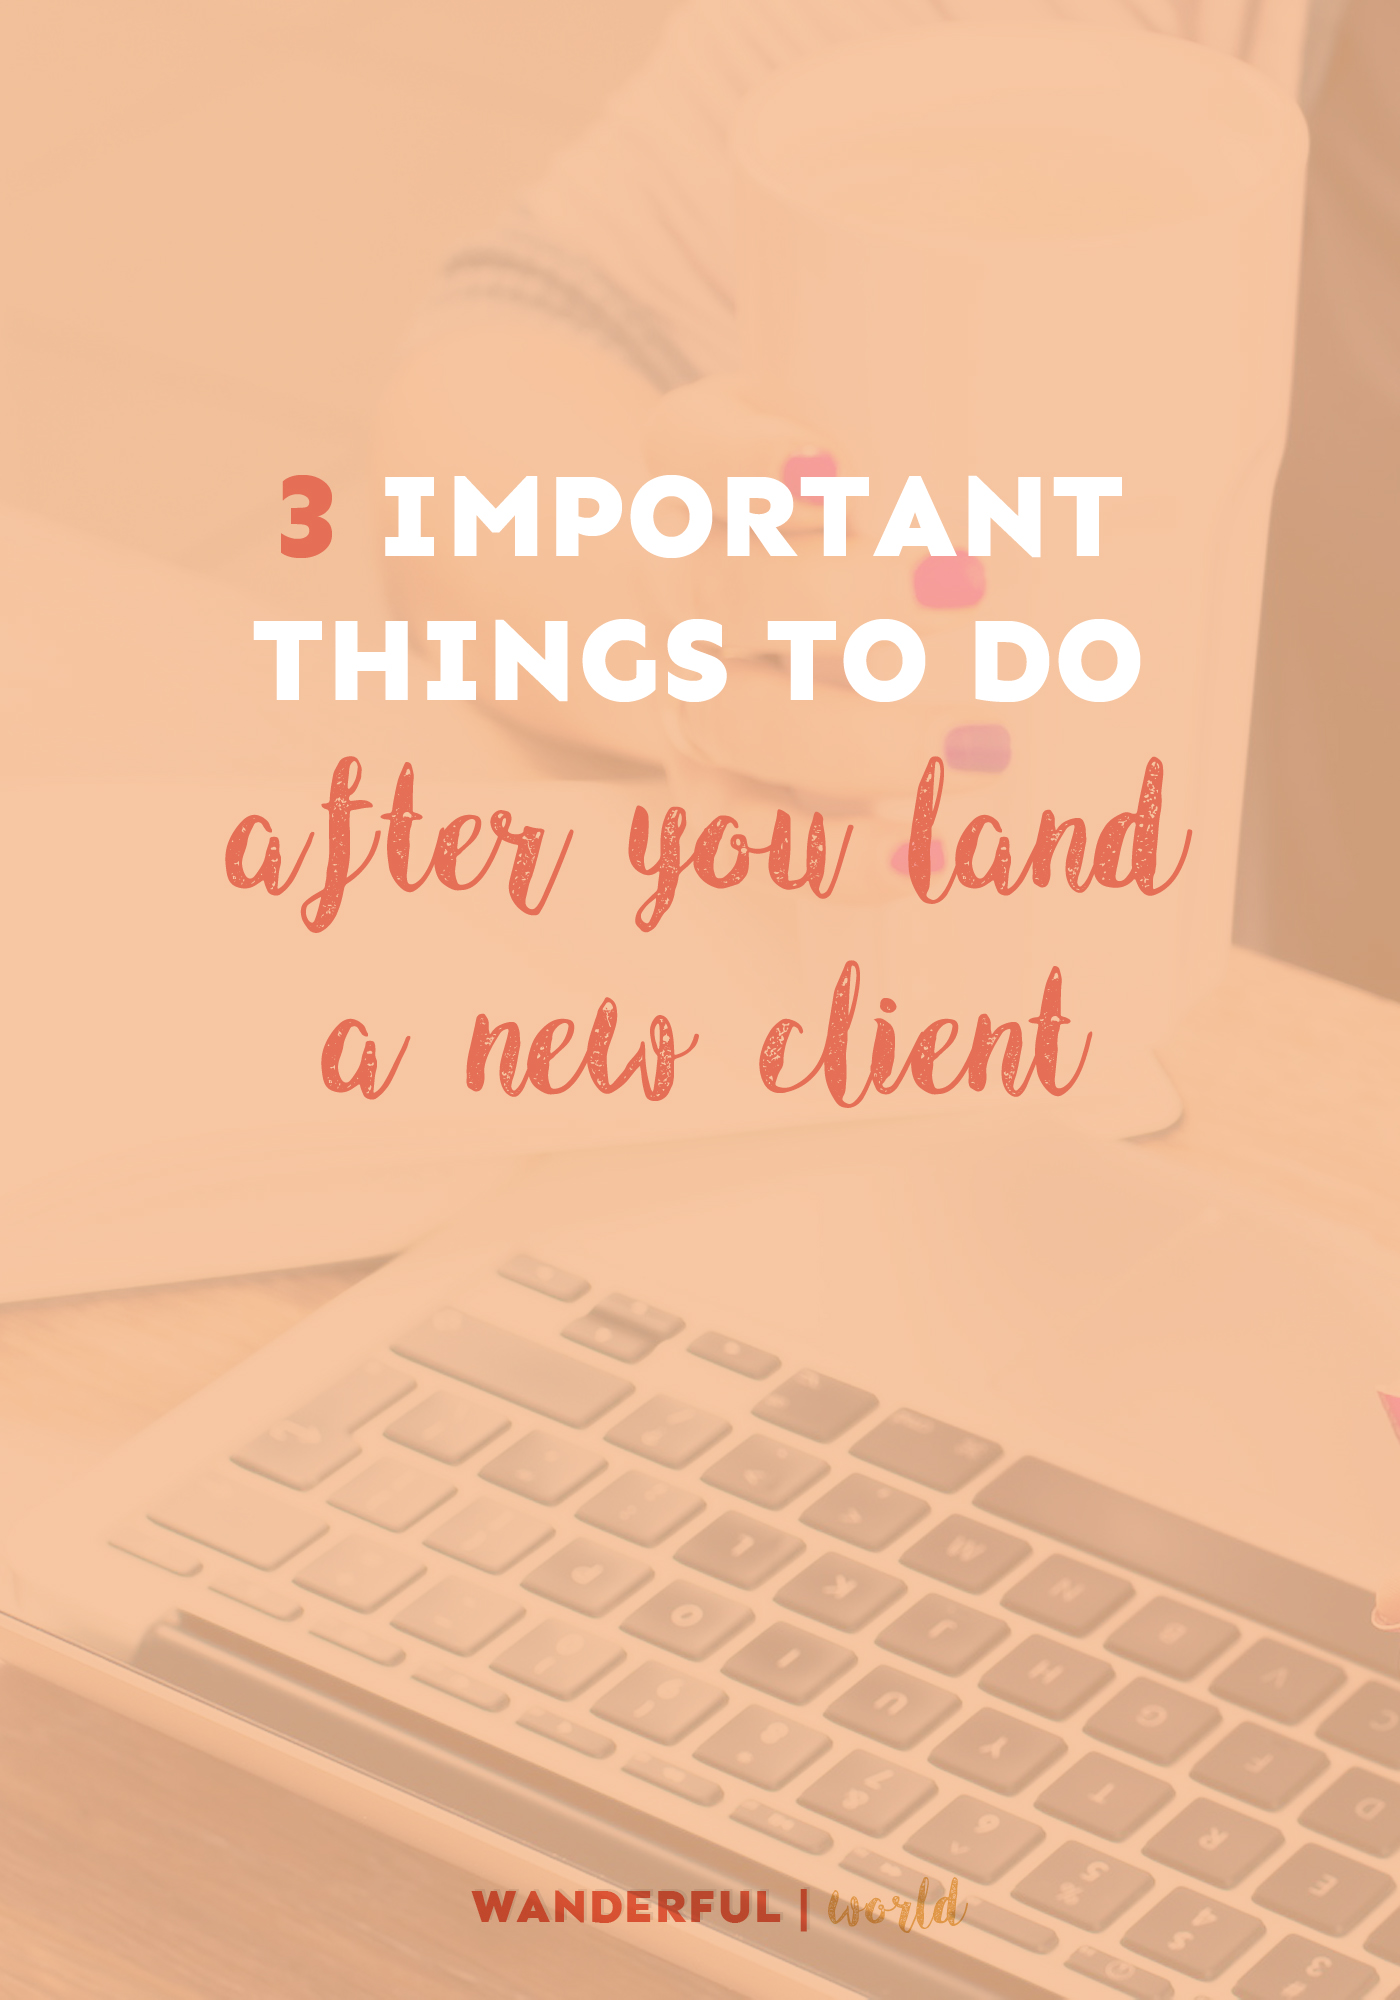 So you've landed a new client - now what? Here are the very next three steps you need to take!